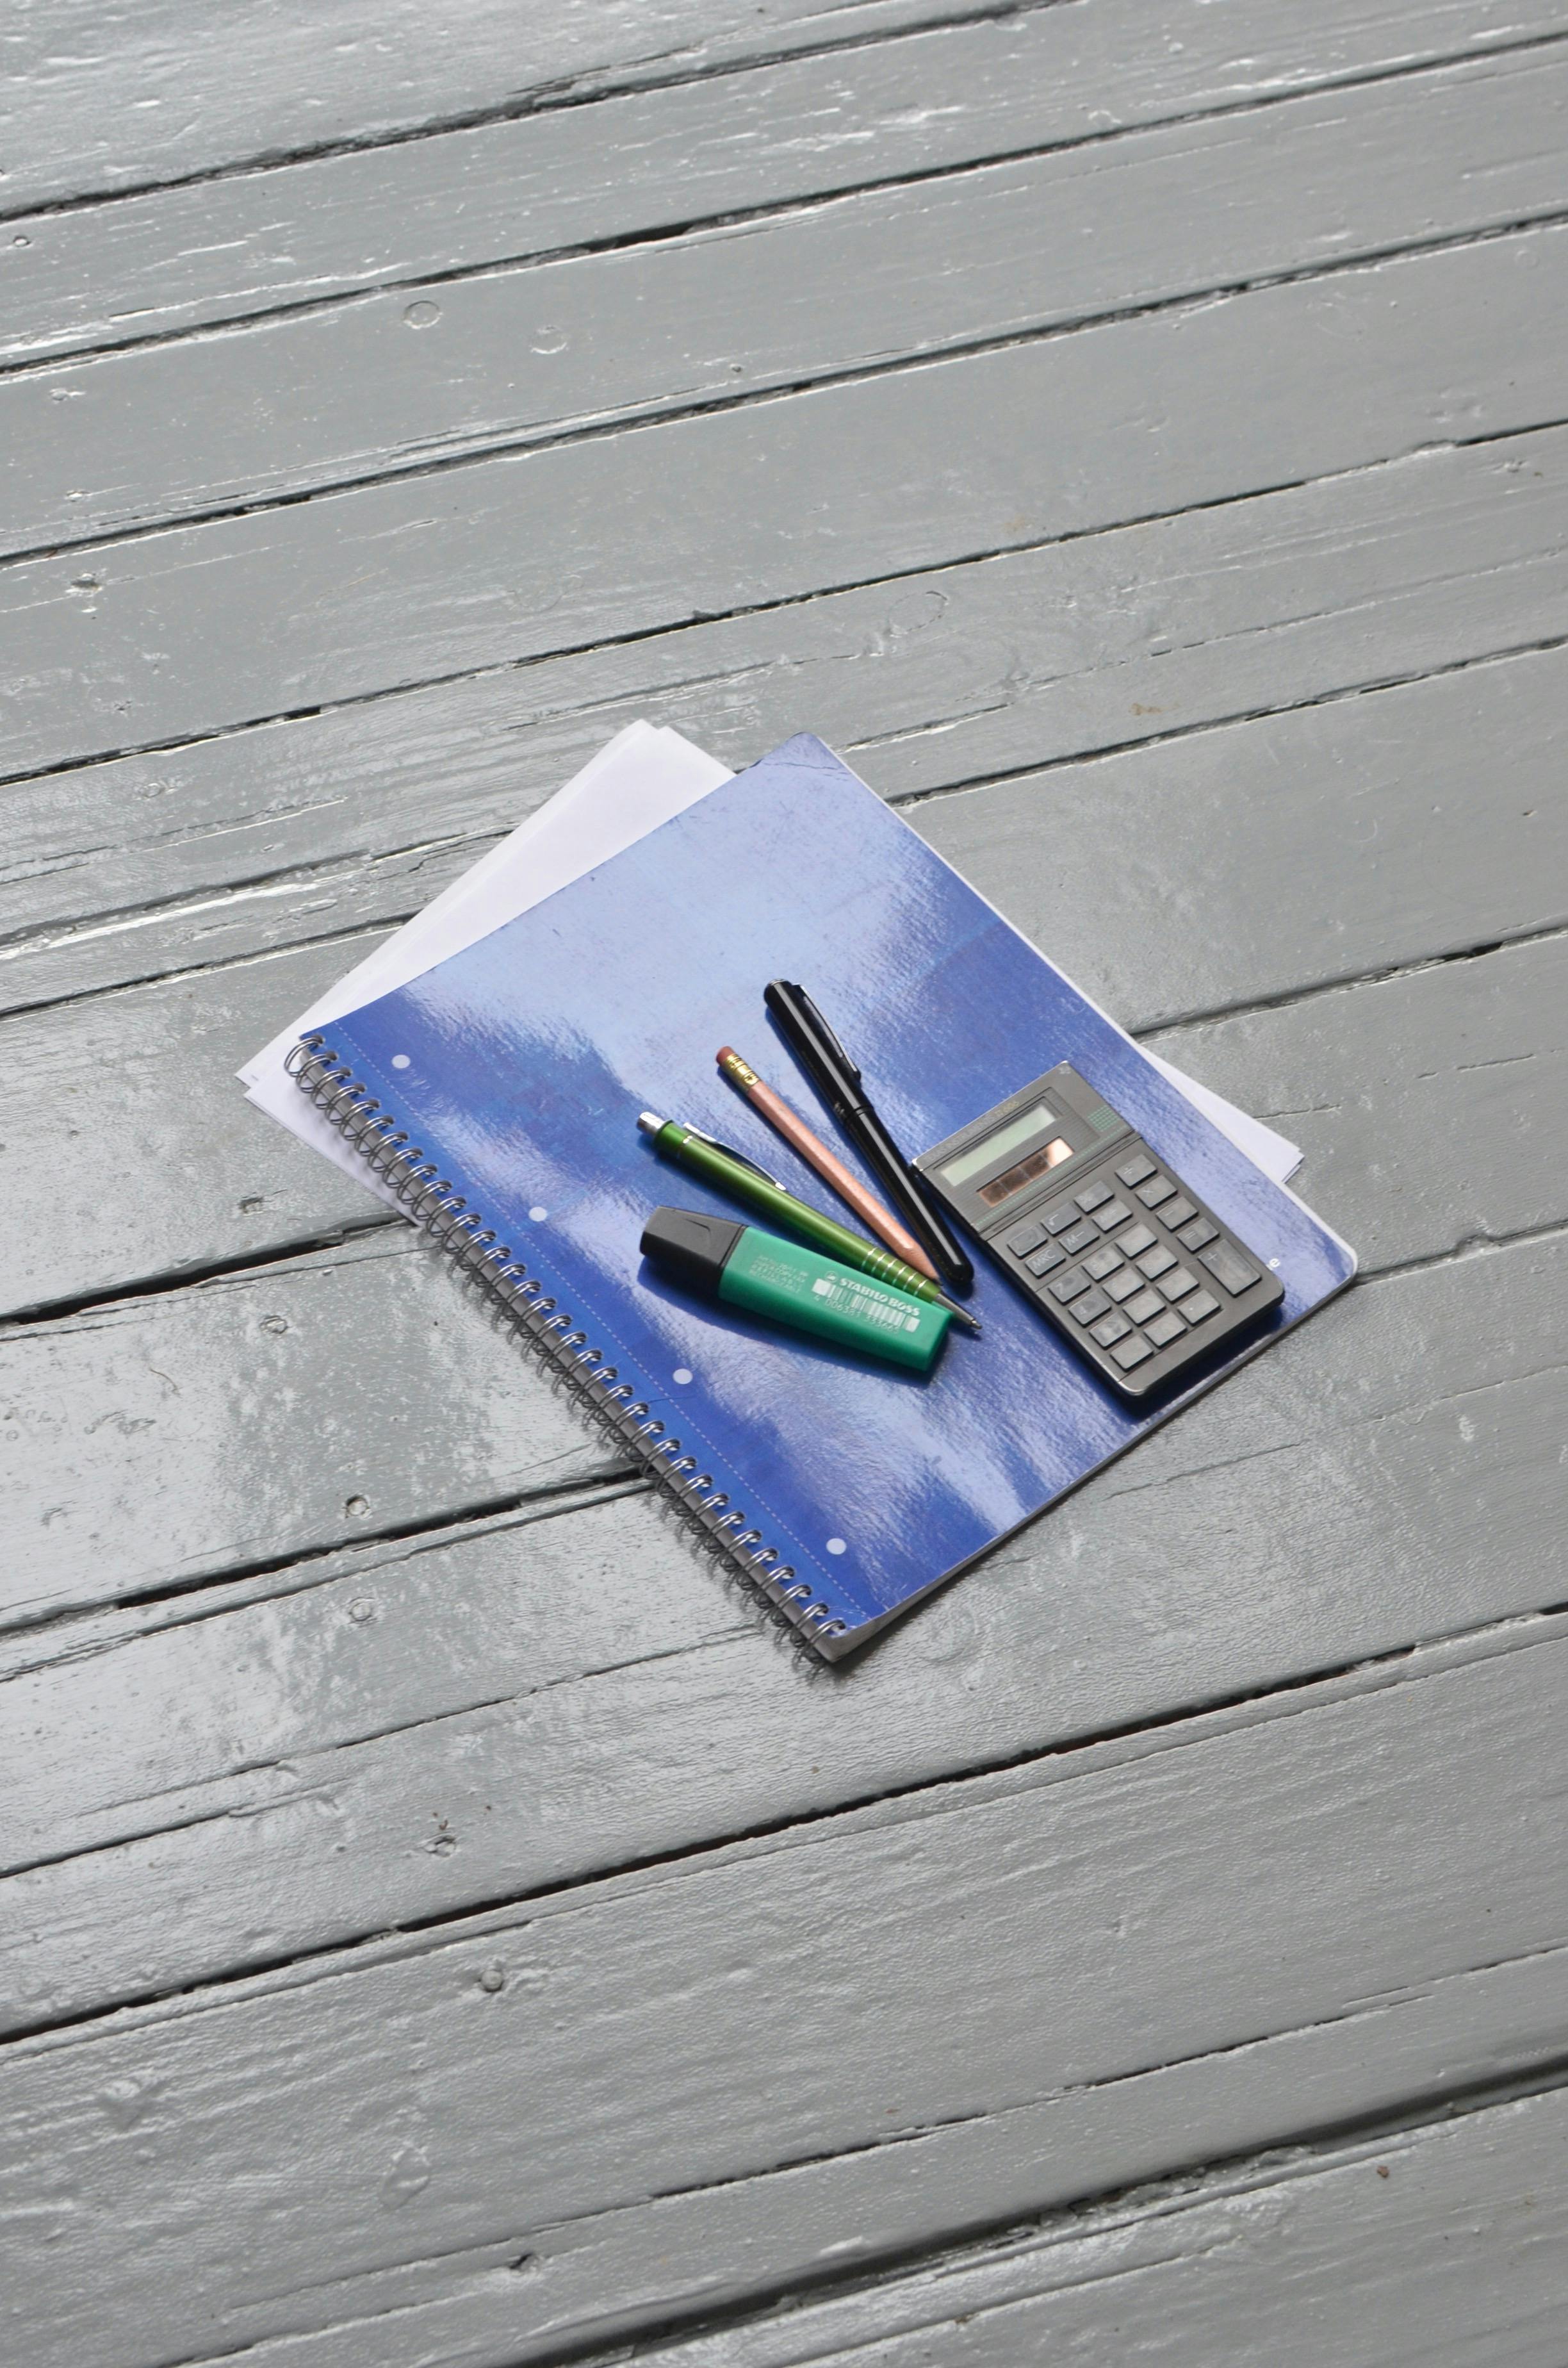 pen pencils and calculator placed on notebook